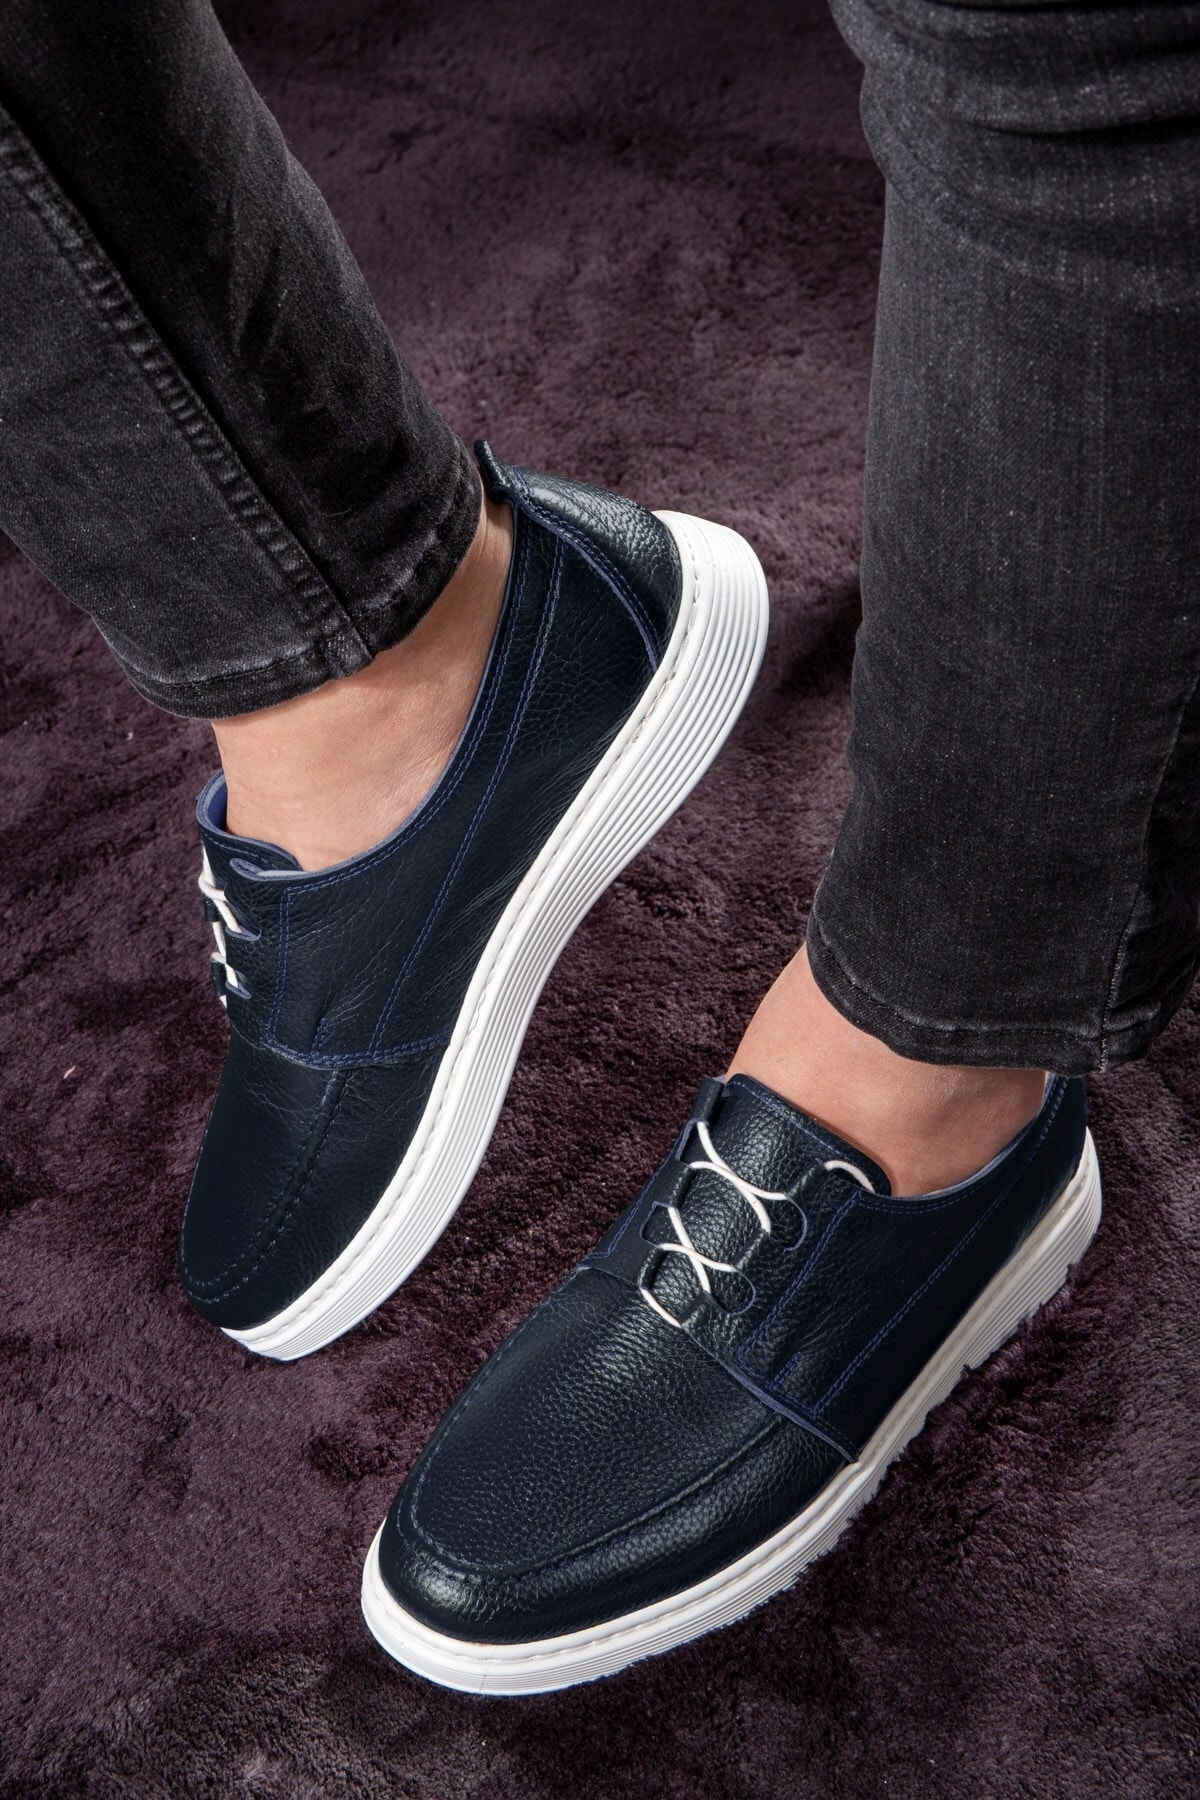 Ducavelli Marine Genuine Leather Men's Casual Shoes, Casual Shoes, Summer Shoes, Lace-Up Lightweight Shoes.